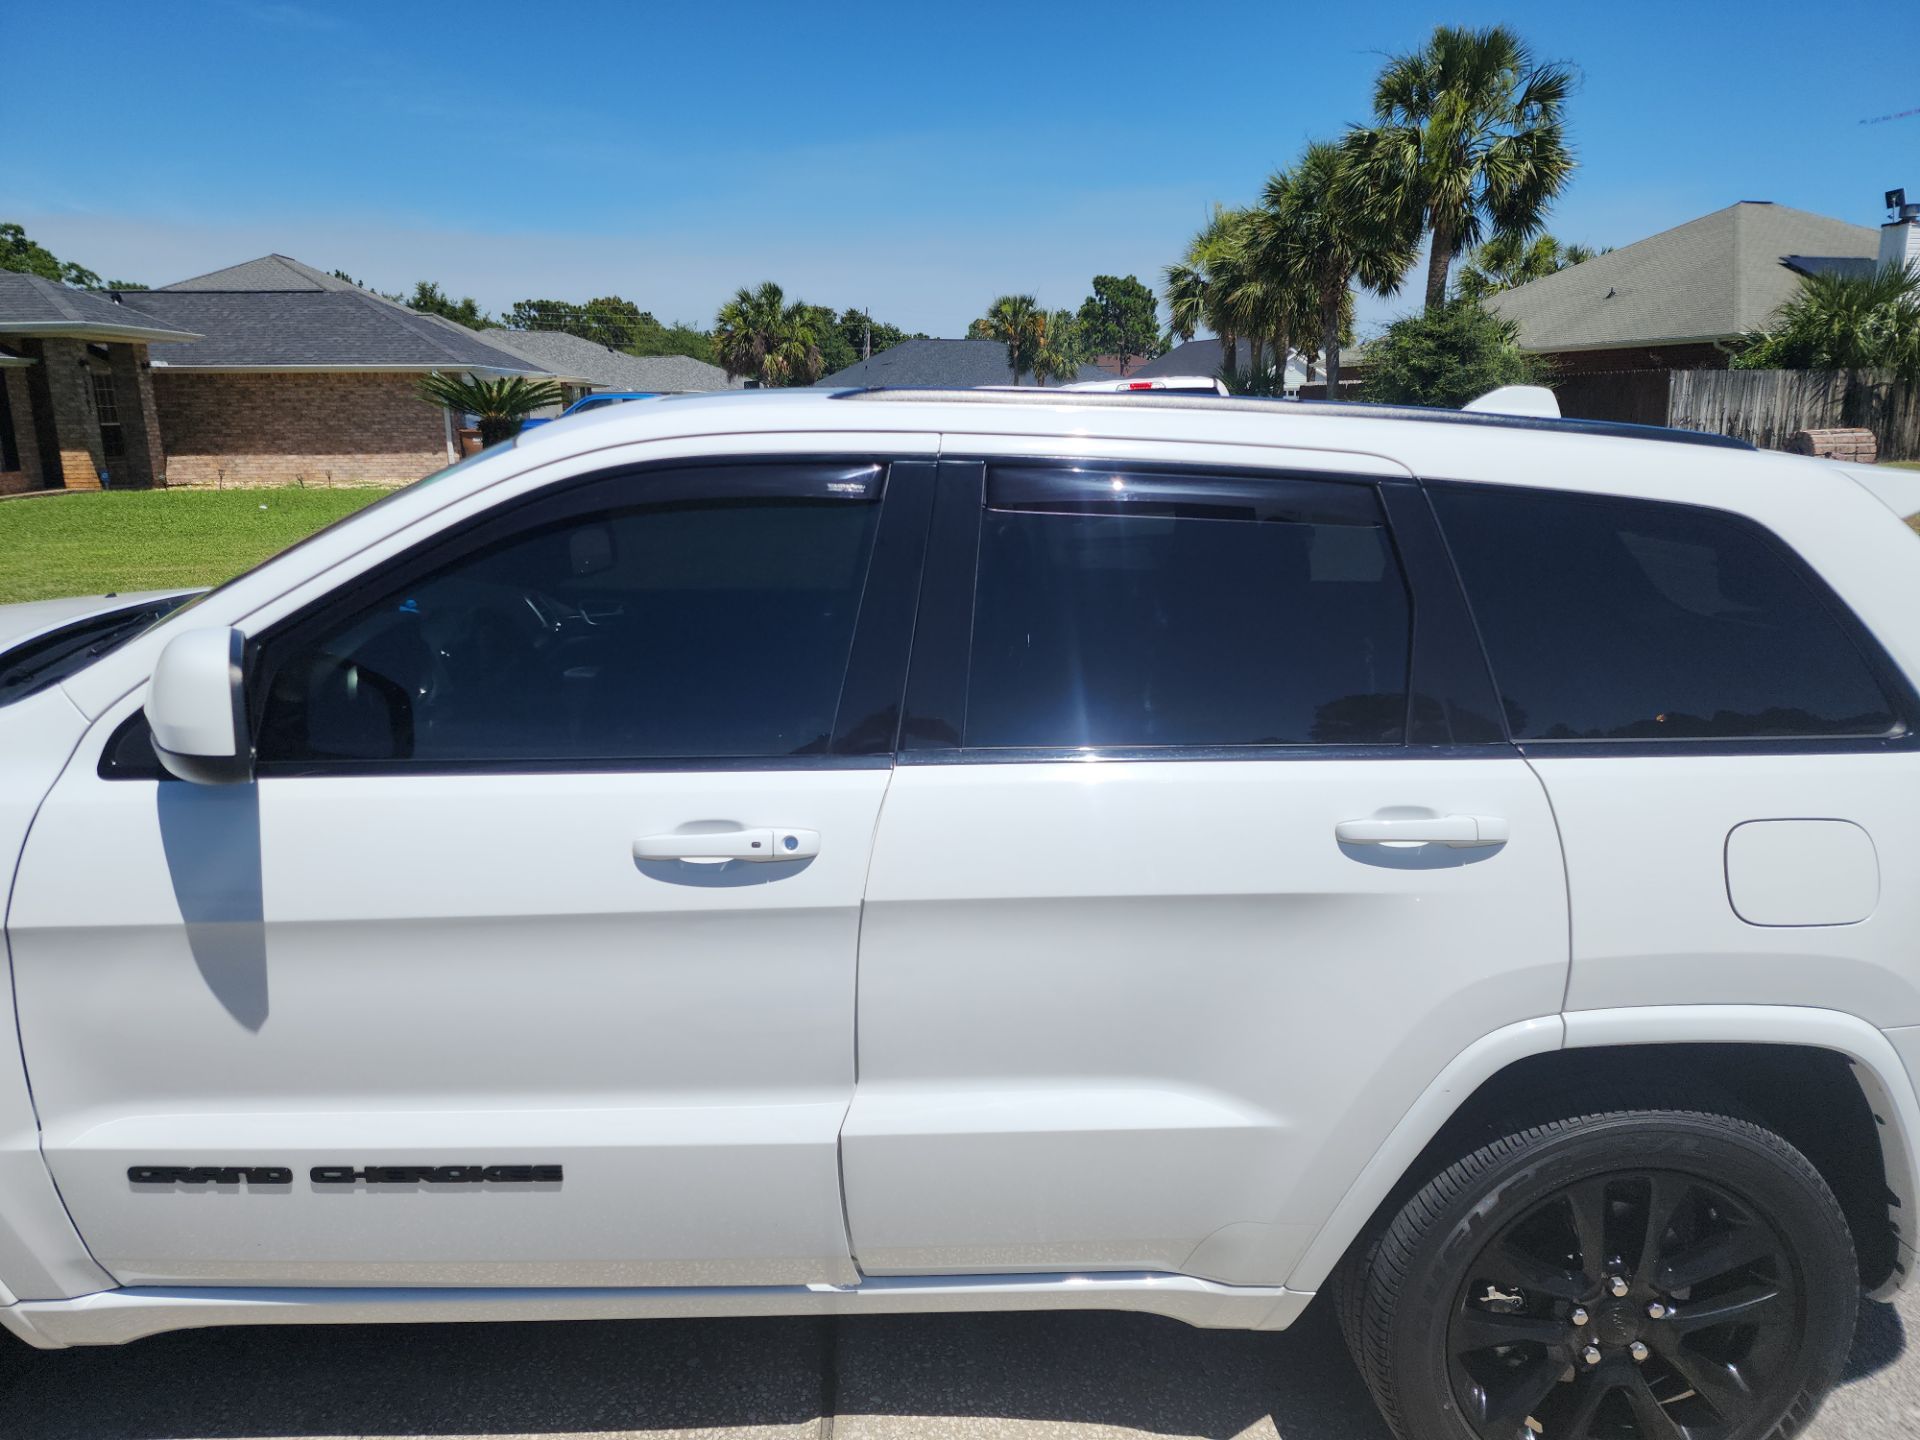 the image shows a white suv with window tinting on the side windows the service provided by the window tinting company likely involves applying a thin laminate film to the vehicle's glass this enhances privacy and reduces glare heat and uv ray exposure from the sun the appearance of the tint is smooth and professional indicating a quality installation service by t's window tinting in pensacola fl the car model is a jeep grand cherokee and the tint appears to be consistent across all the side windows providing a uniform look